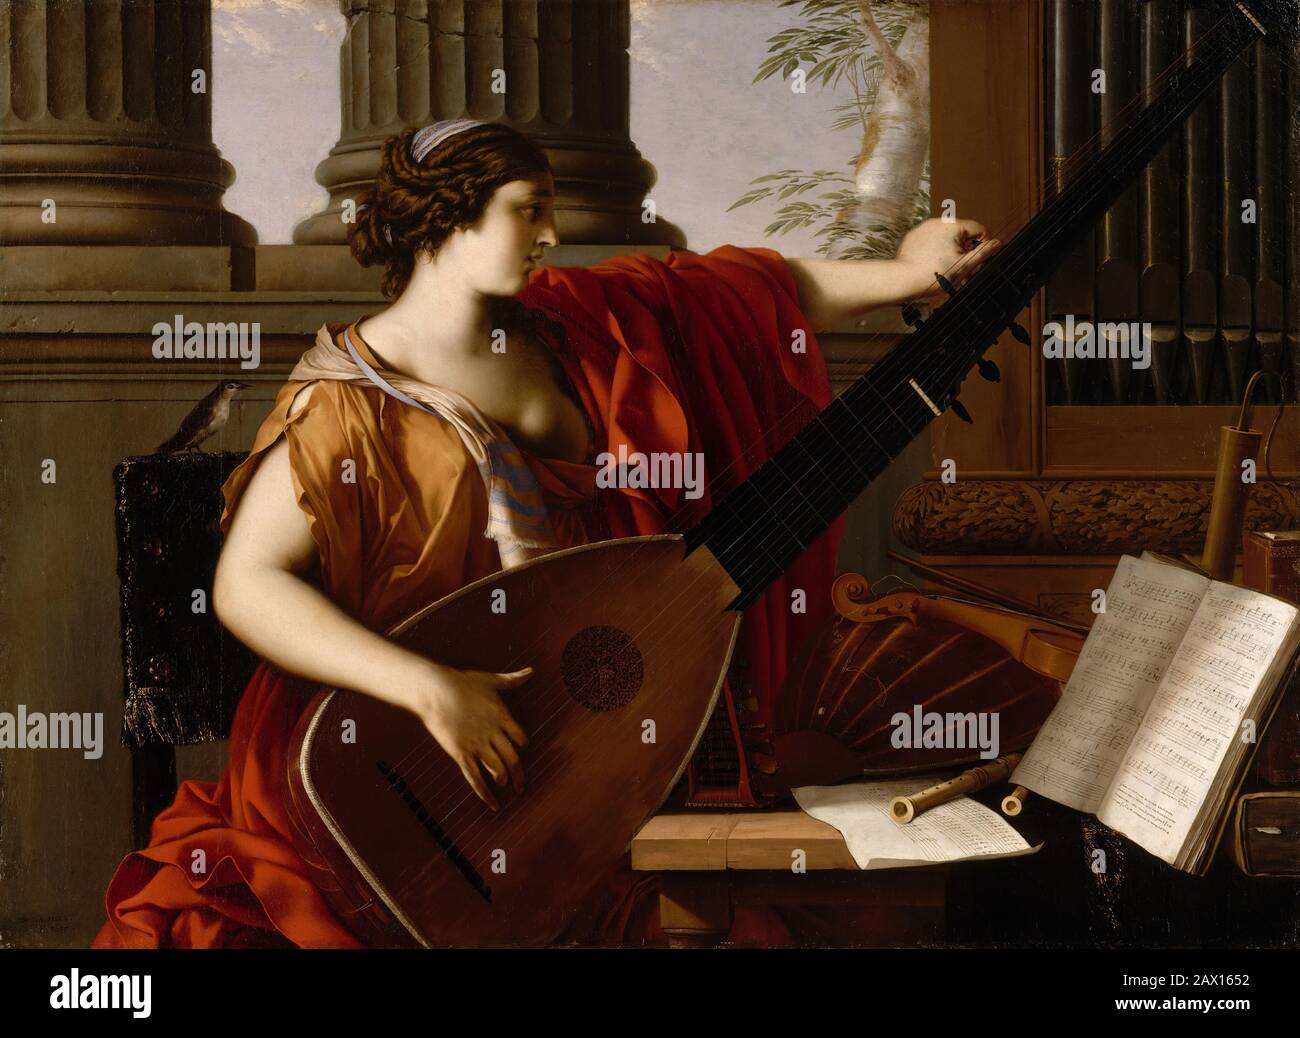 Allegory of Music, 1649. allegorical figure tunes a theorbo. At her shoulder is a songbird, symbol of natural music, whereas by contrast she may be a representation of modern music theory and practice. To the right are various contemporary instruments and scores: a lute, a violin, two recorder Stock Photo